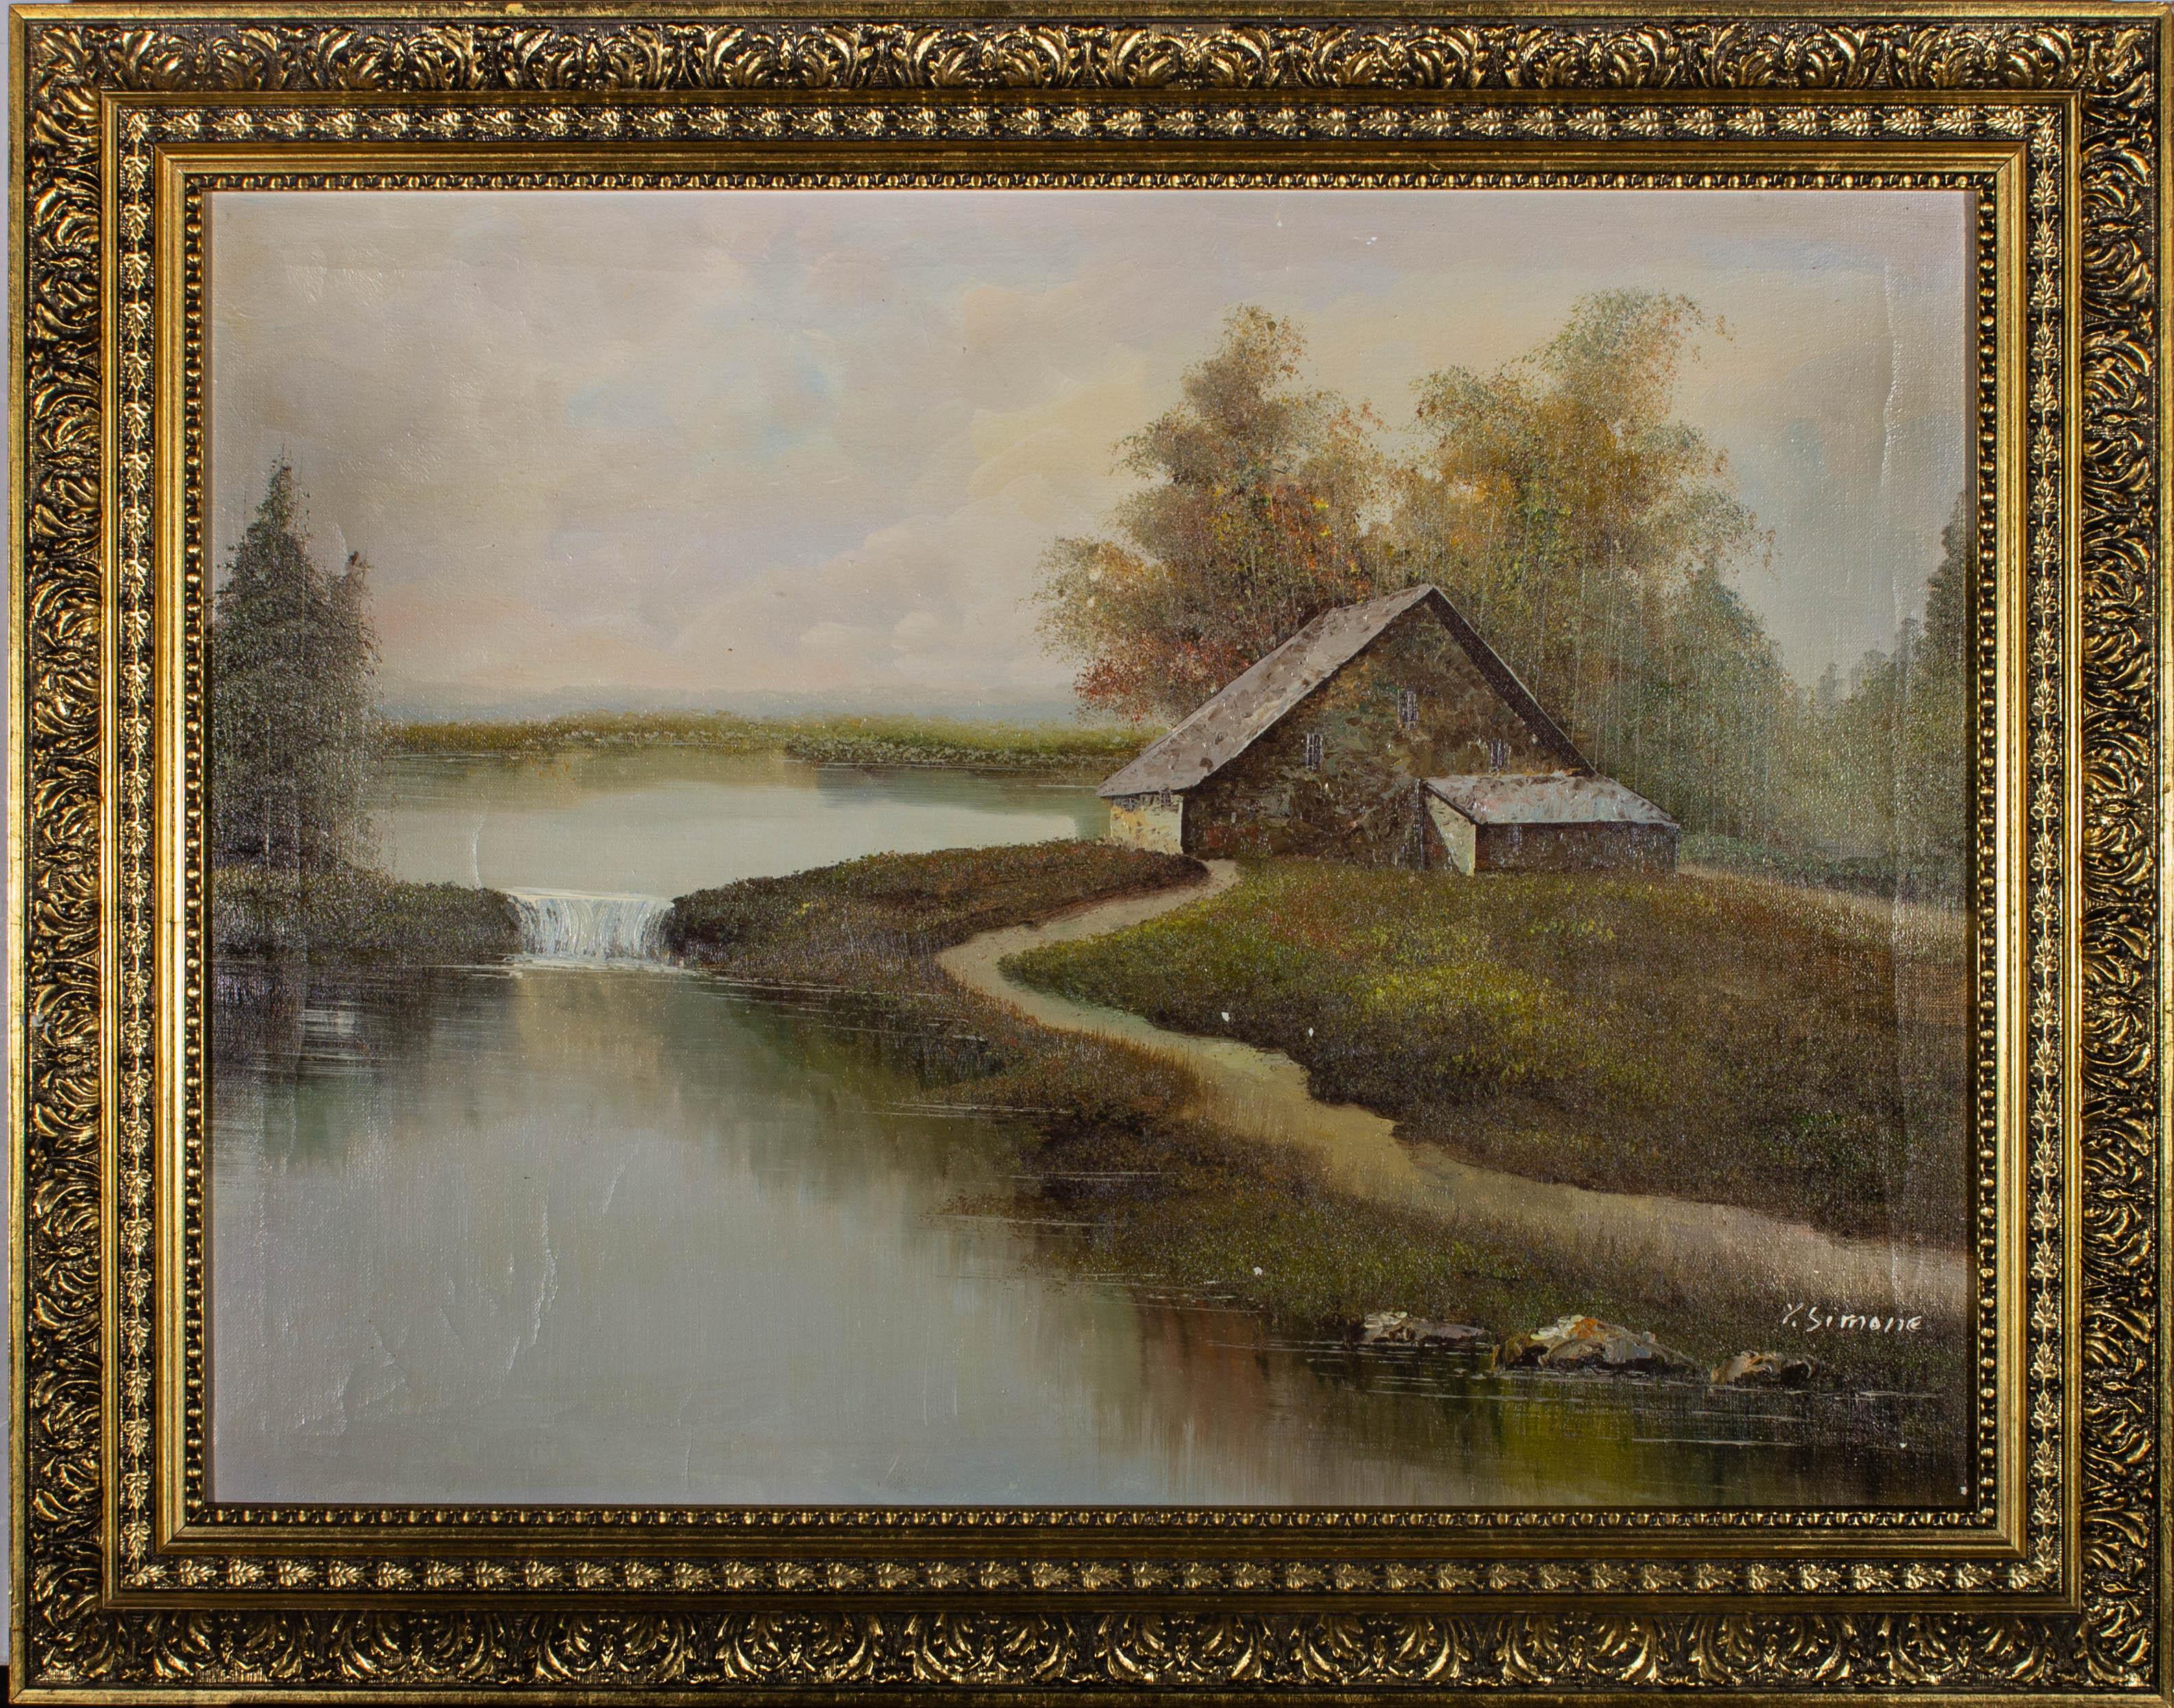 A charming rural scene of a quaint cottage on the edge of a lake. Well presented in a decorative gilt effect frame. Signed. On canvas on stretchers.
